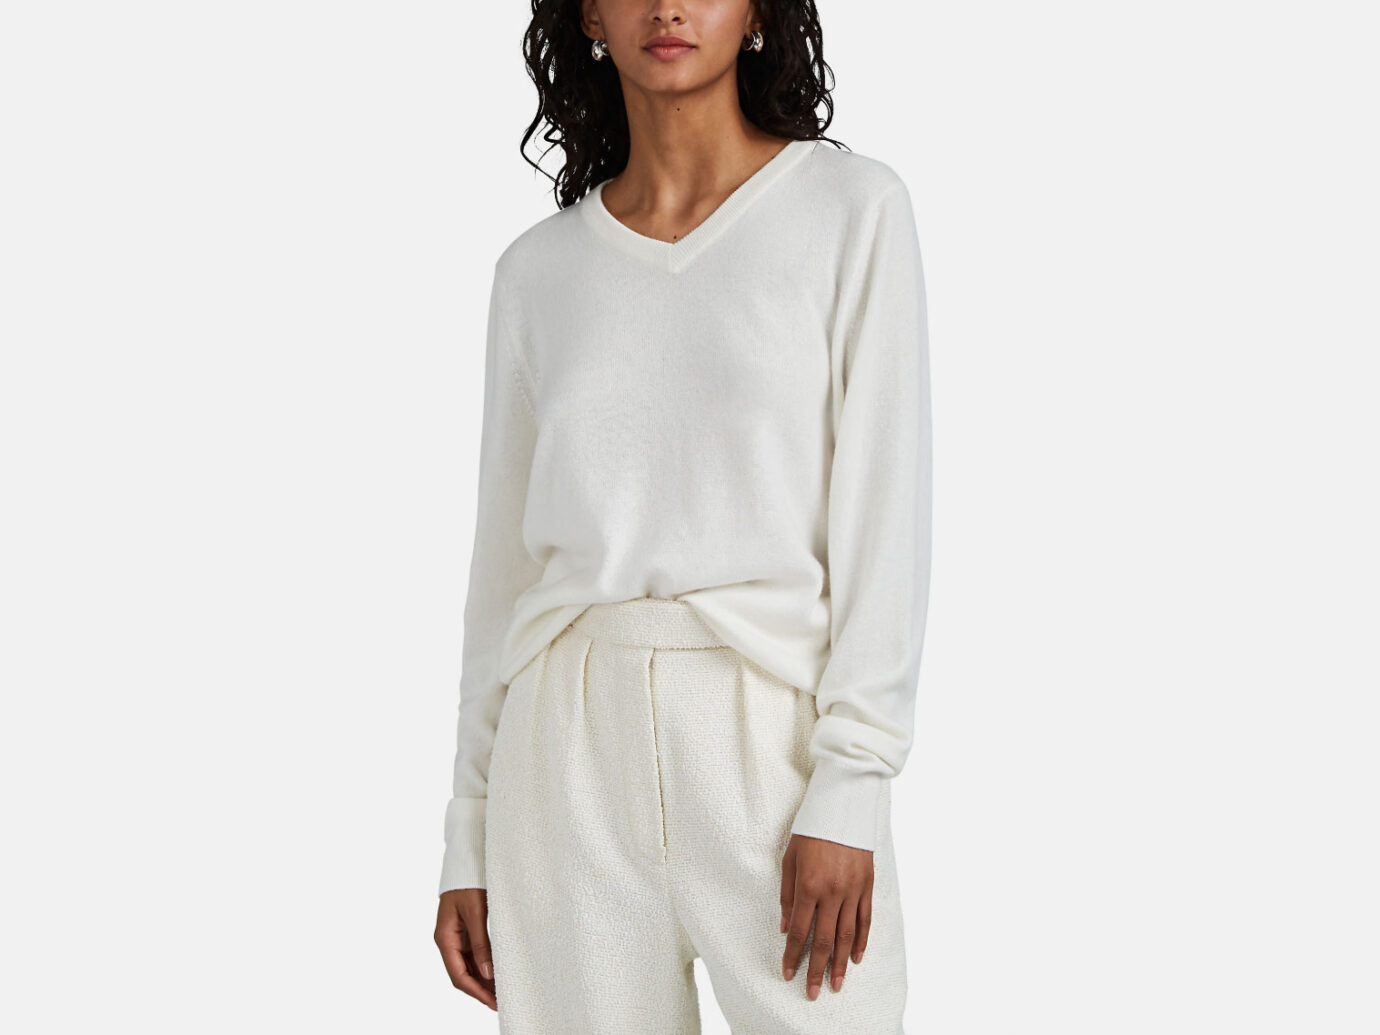 The Row Maley Cashmere Sweater